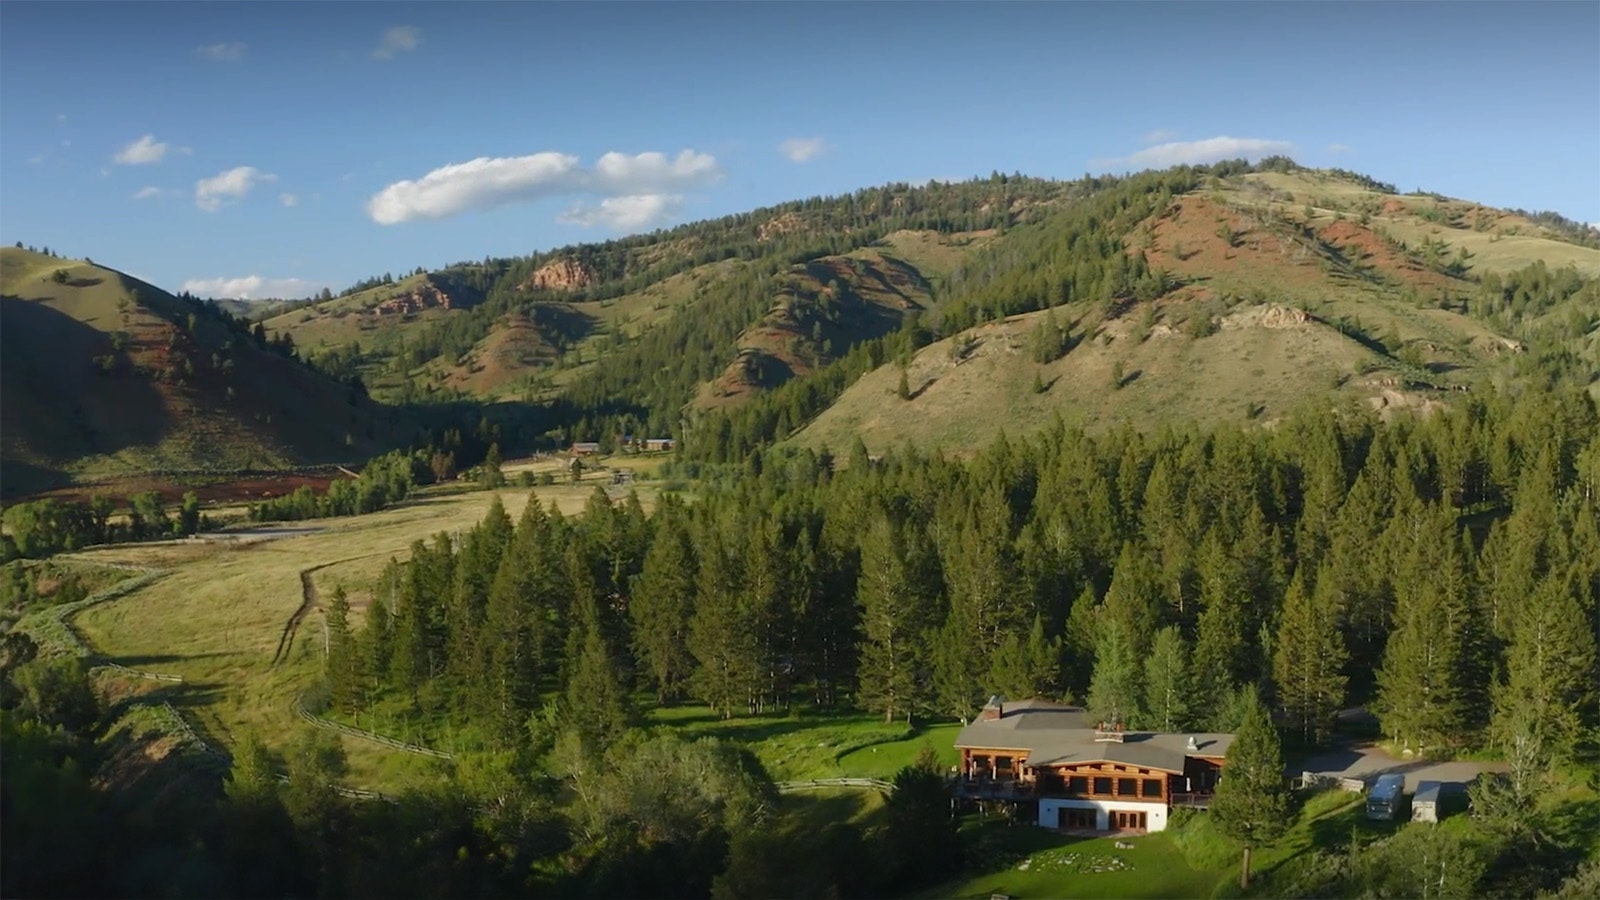 The Historic Grand View River Ranch, formerly the Gros Ventre Ranch, has sold. The pristine 118-acre ranch was listed for $58 million for the property situated along the Gros Ventre River adjacent to Grand Teton National Park.